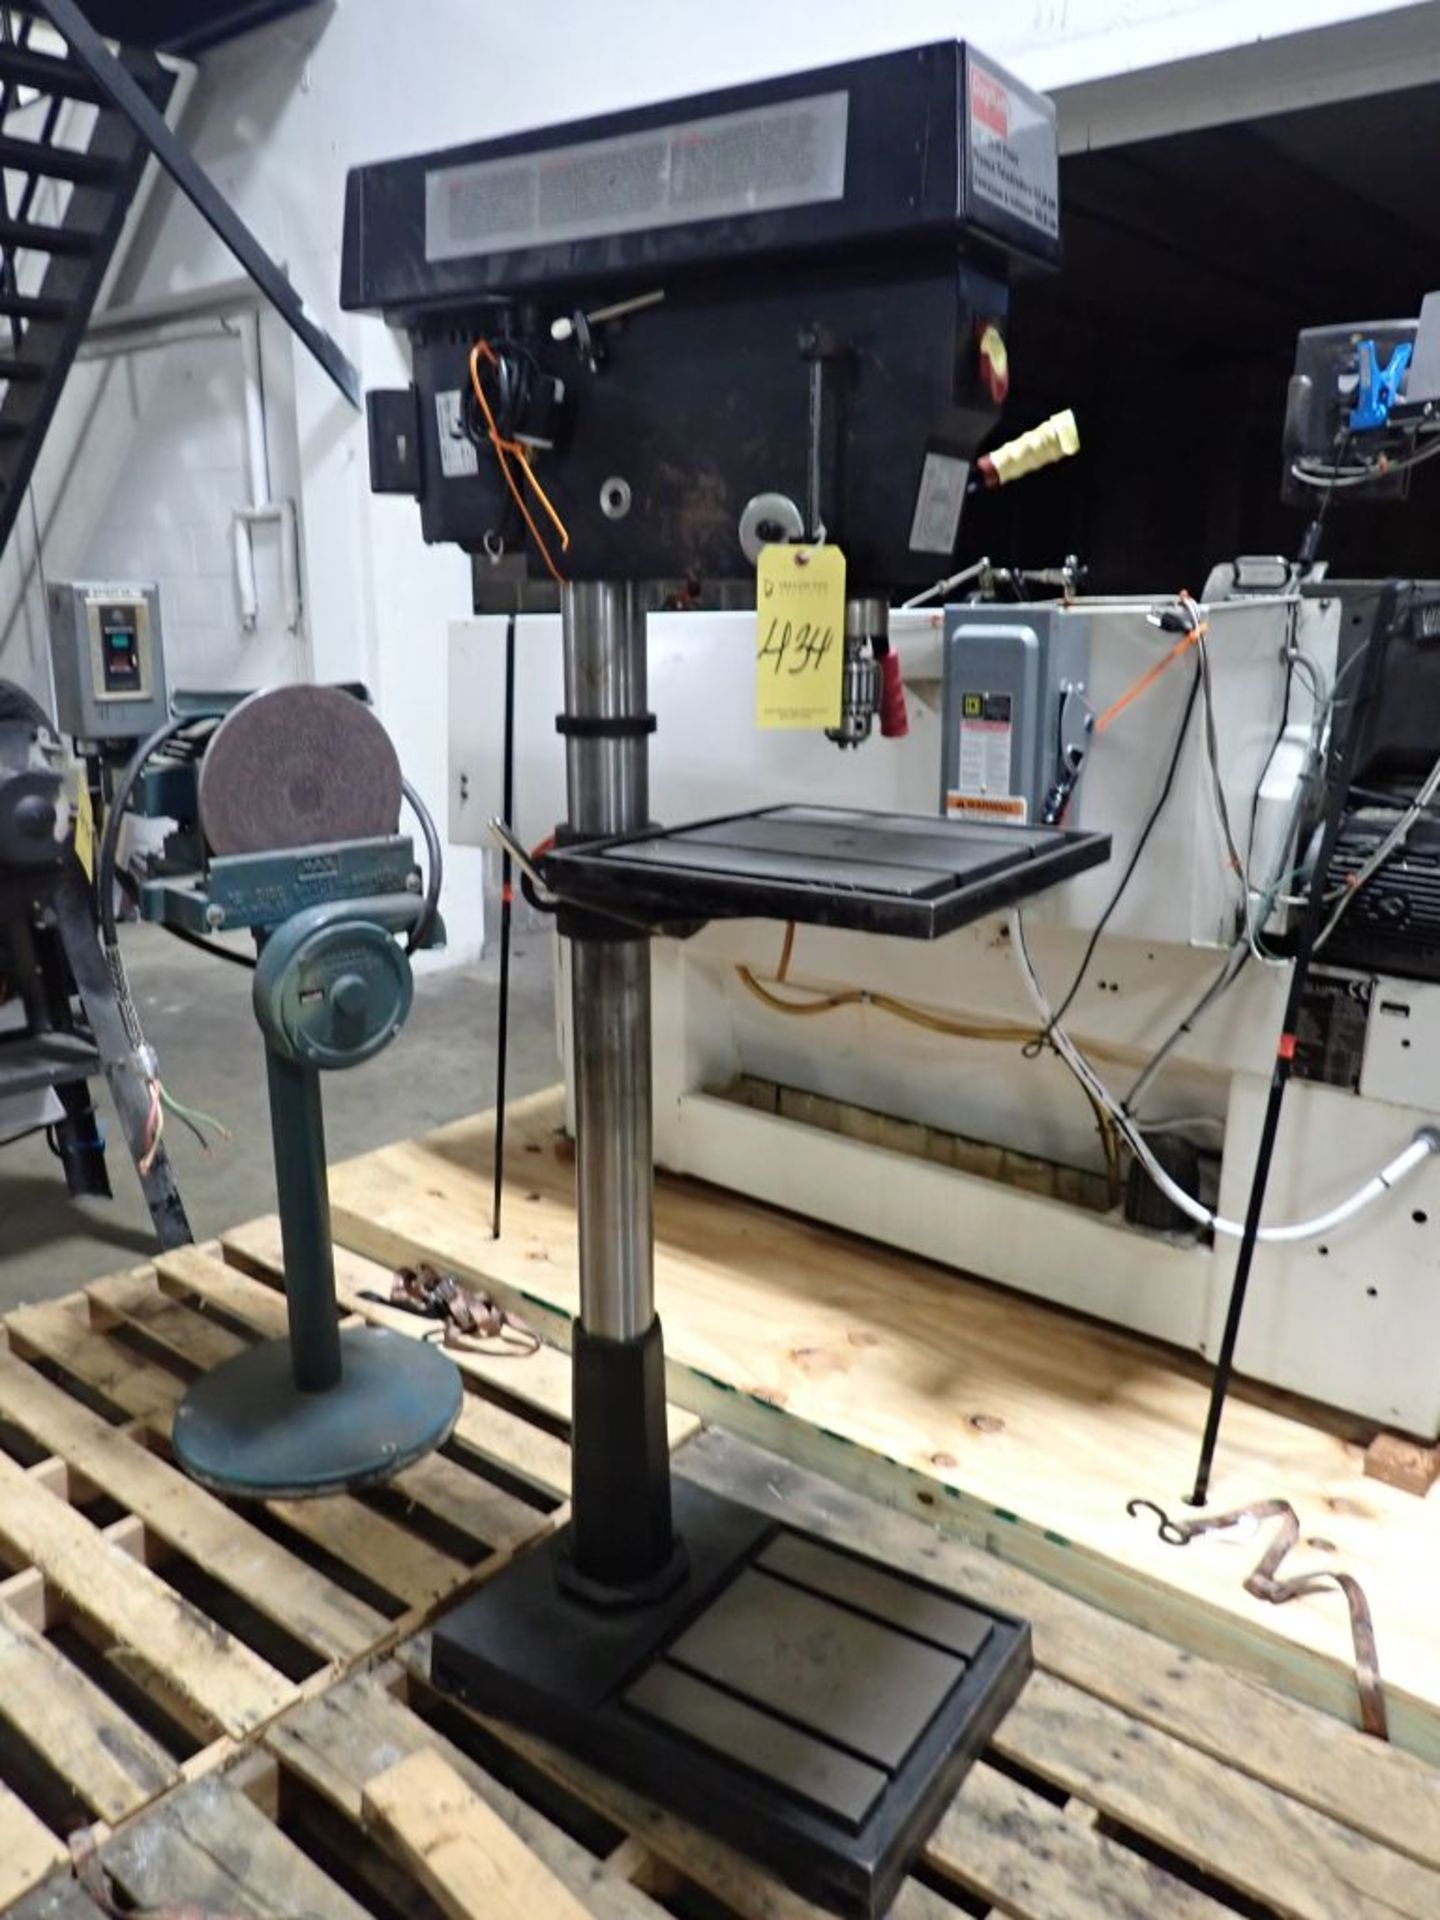 Dayton 20" Drill Press | 115V; Tag: 241434 | Limited Forklift Assistance Available - $10.00 Lot